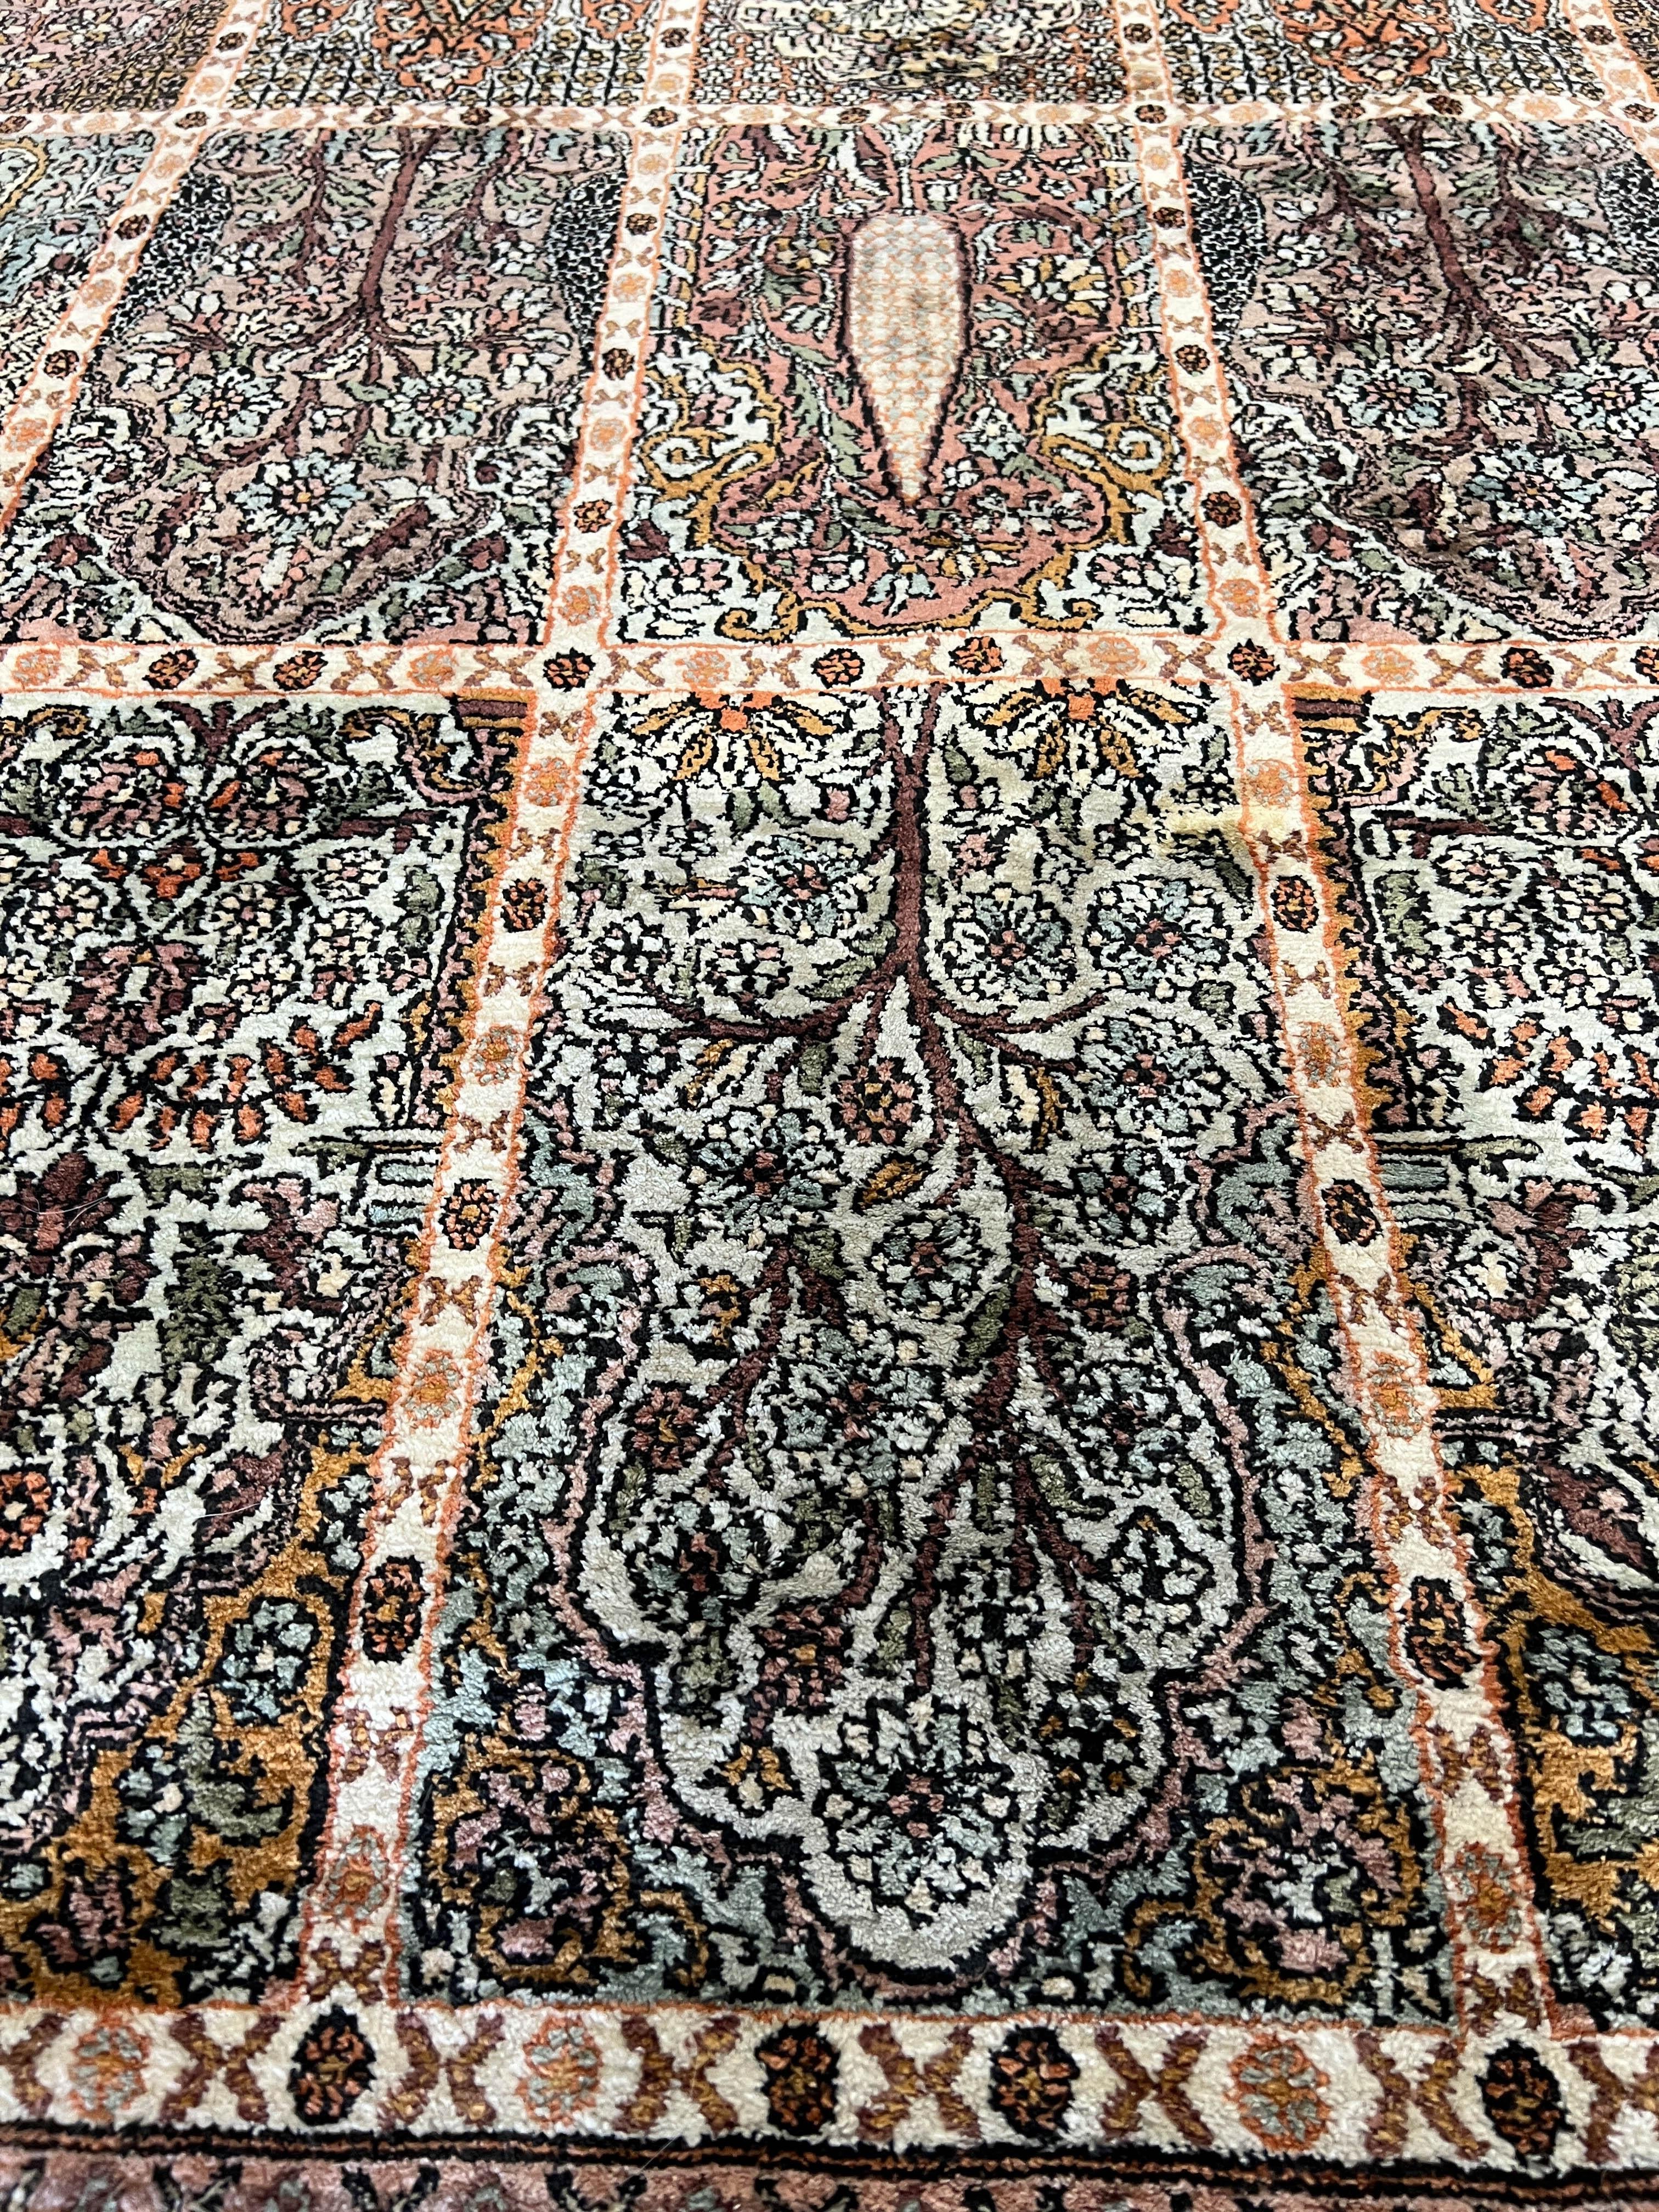 Hand-Knotted Kashmir Silk Pile Rug - 12' x 18' For Sale 4